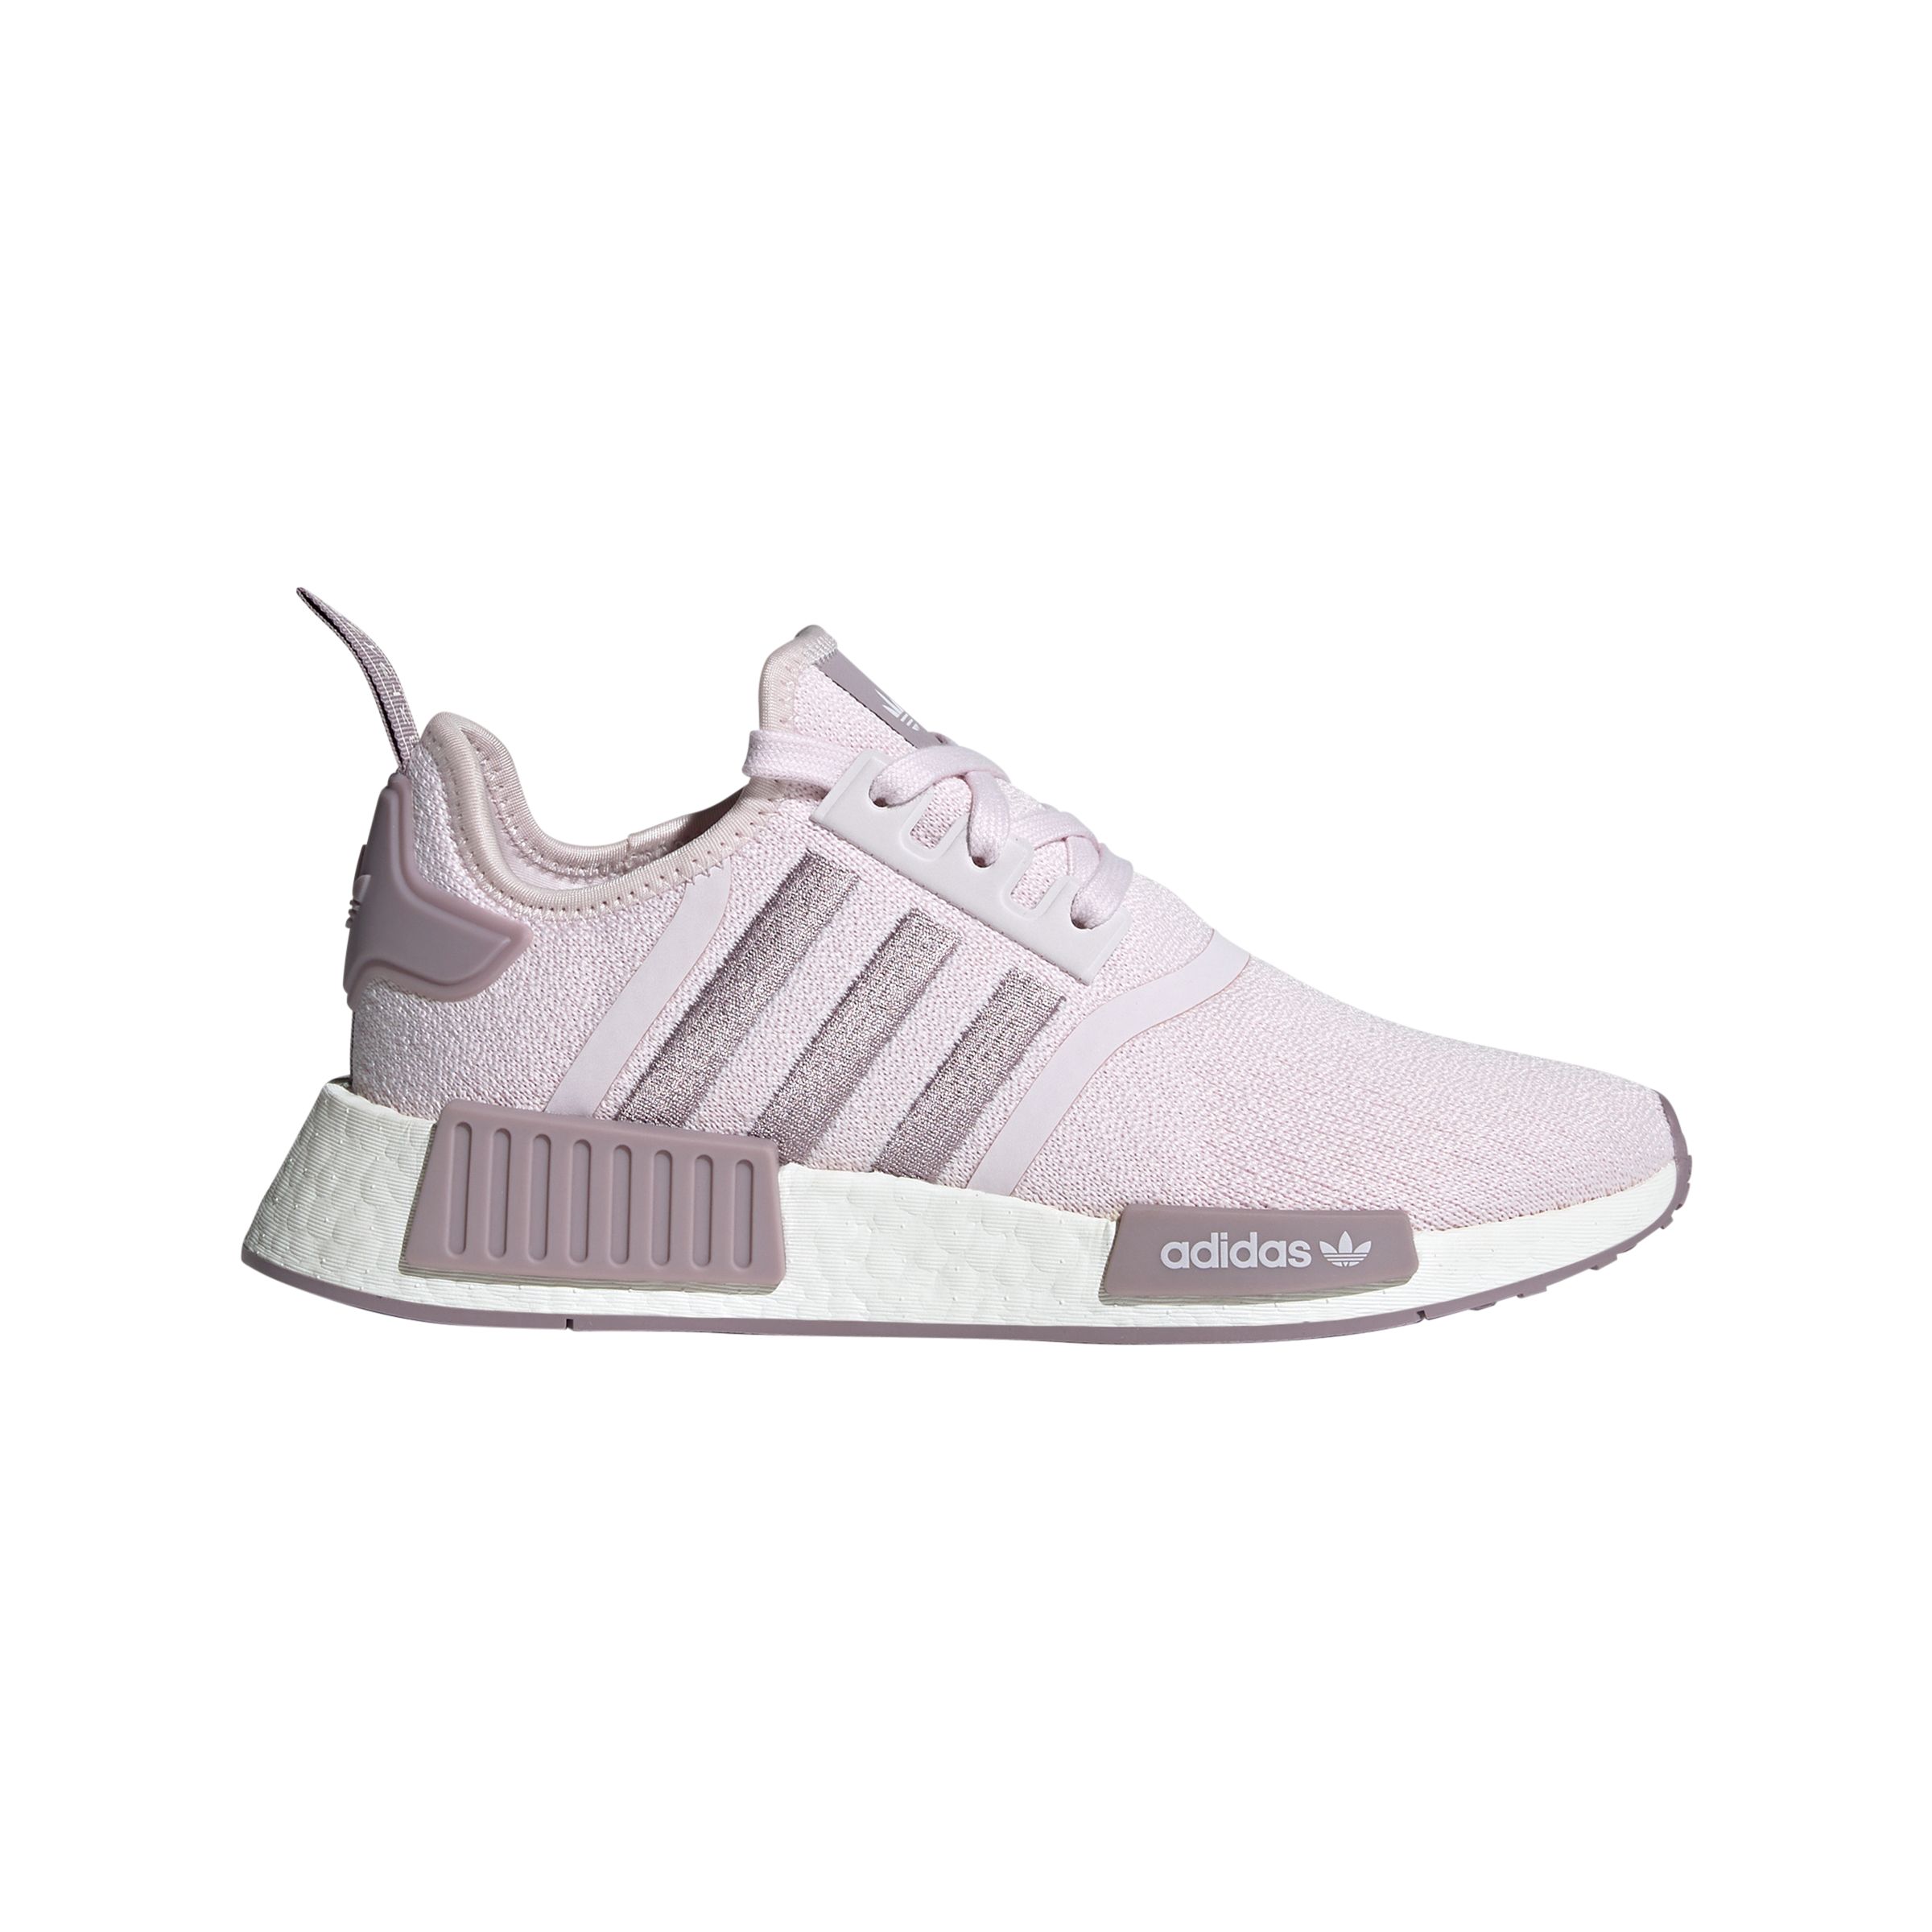 Image of adidas Women's Nmd_R1 Shoes